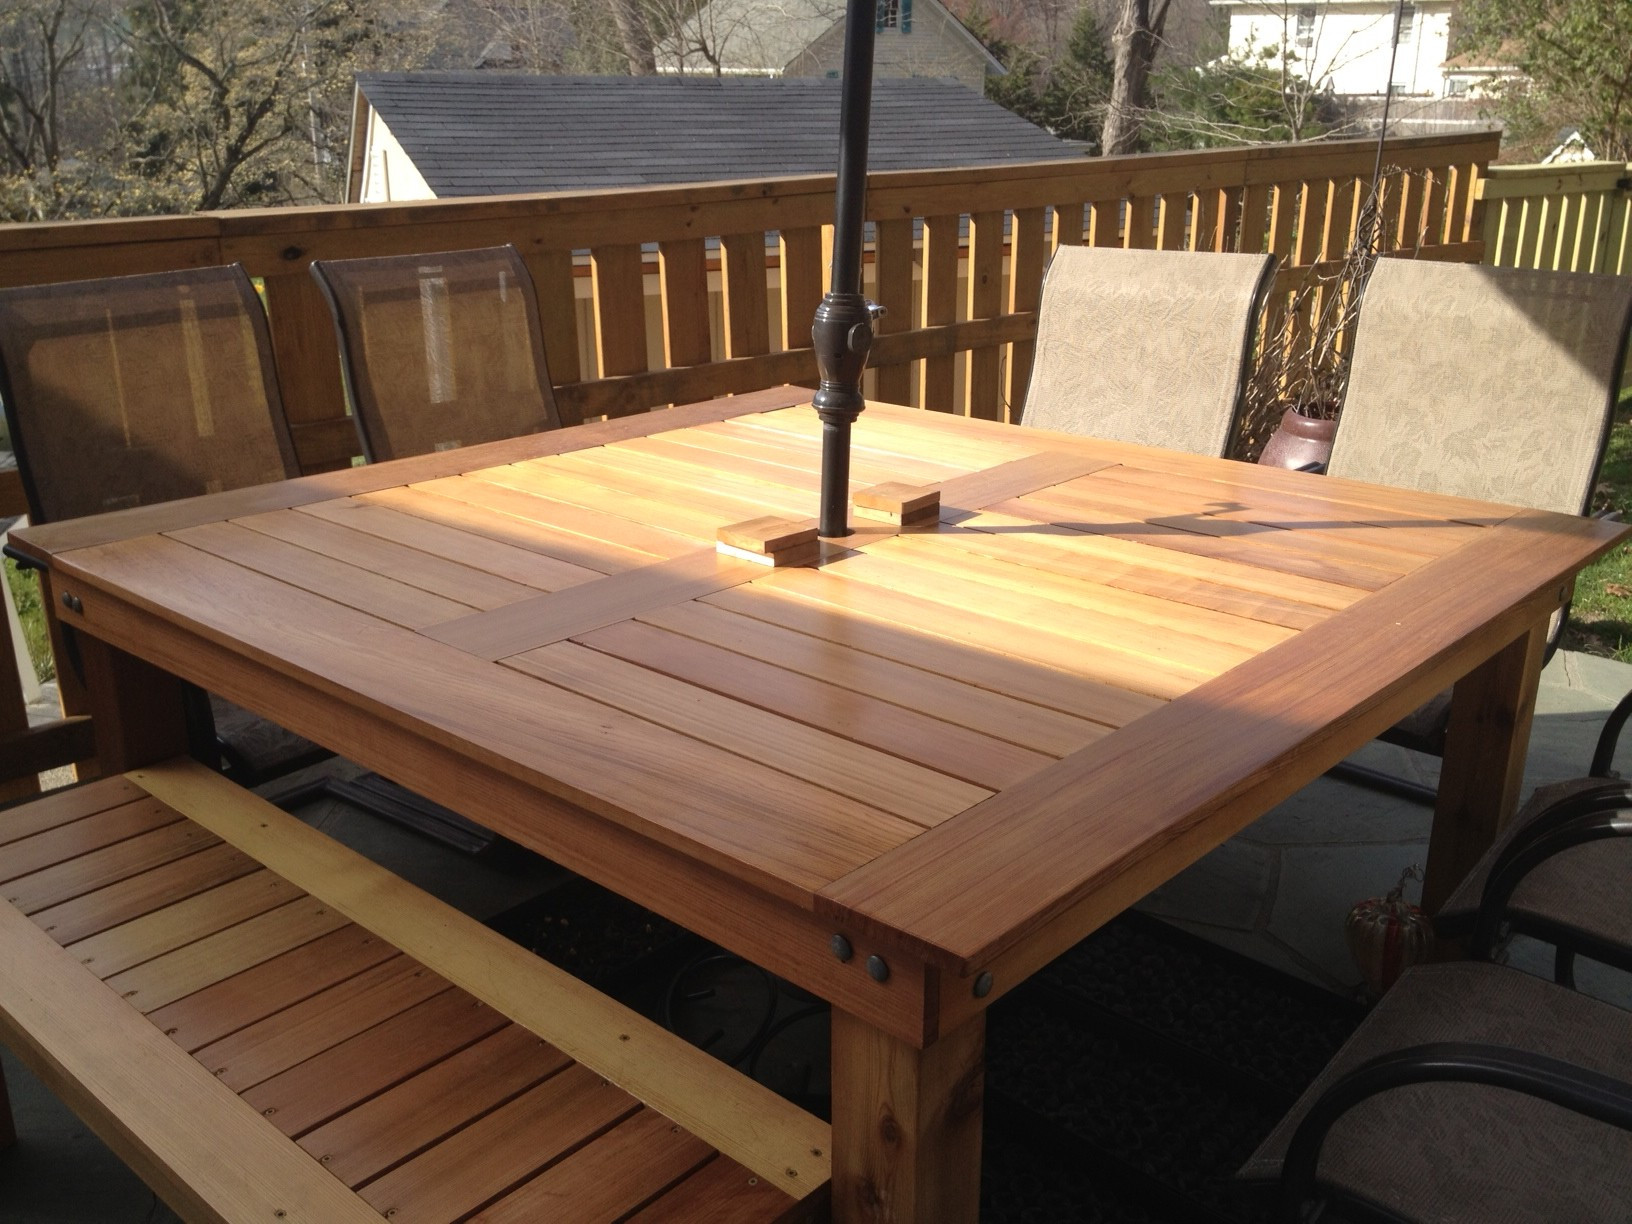 DIY Outdoor Dining Table Plans
 Ana White